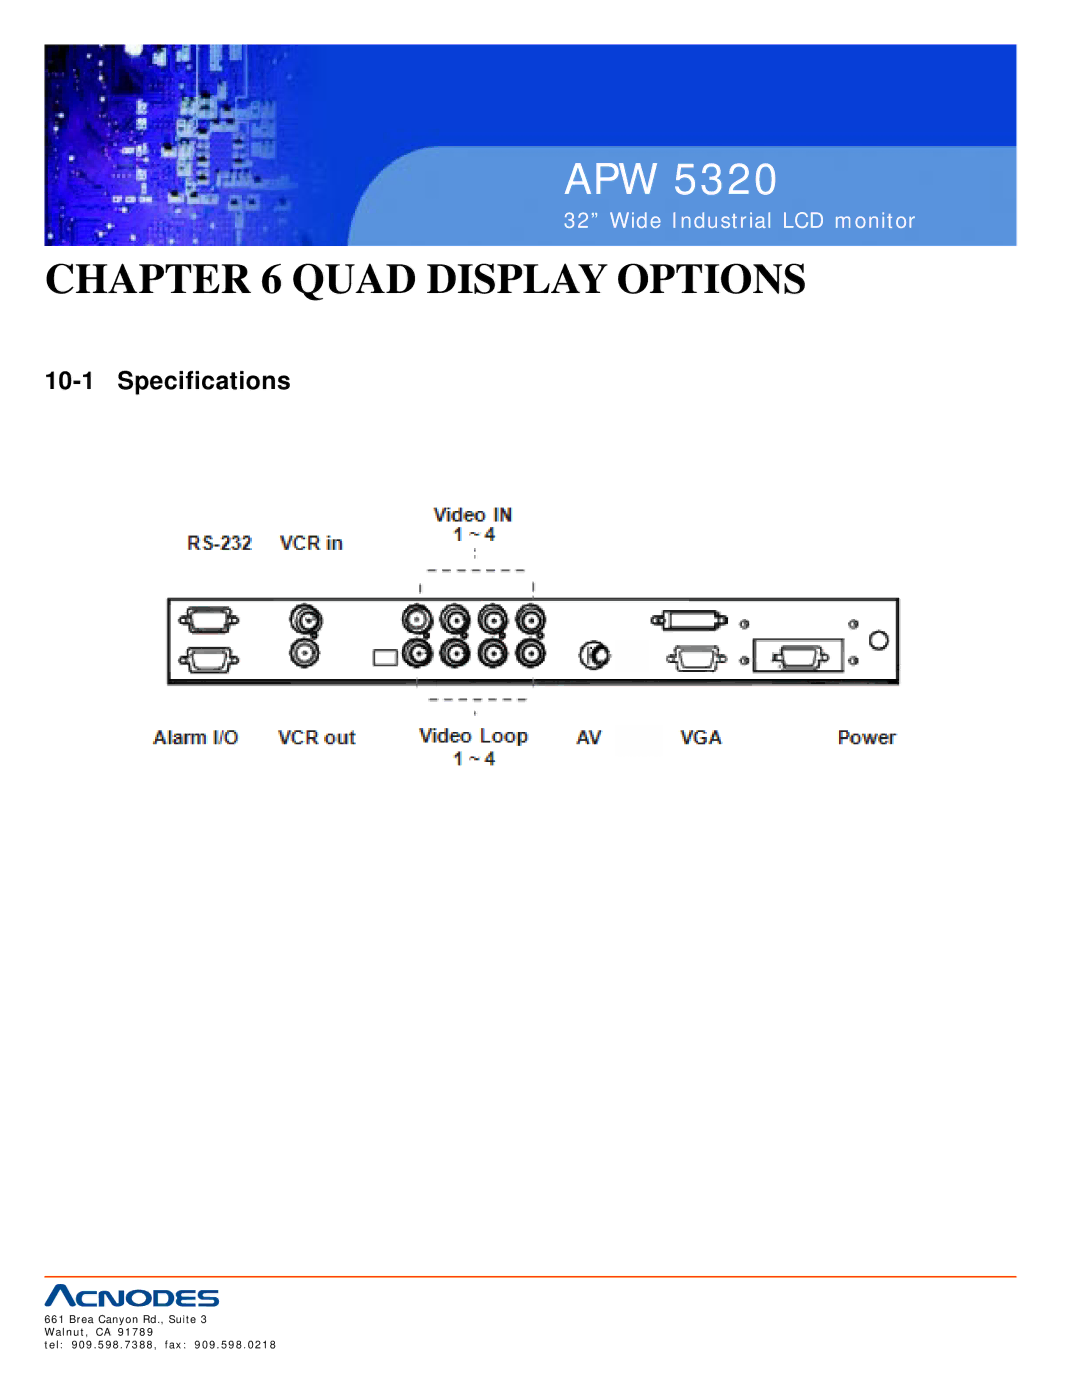 Acnodes APW 5320 user manual Quad Display Options, Specifications 